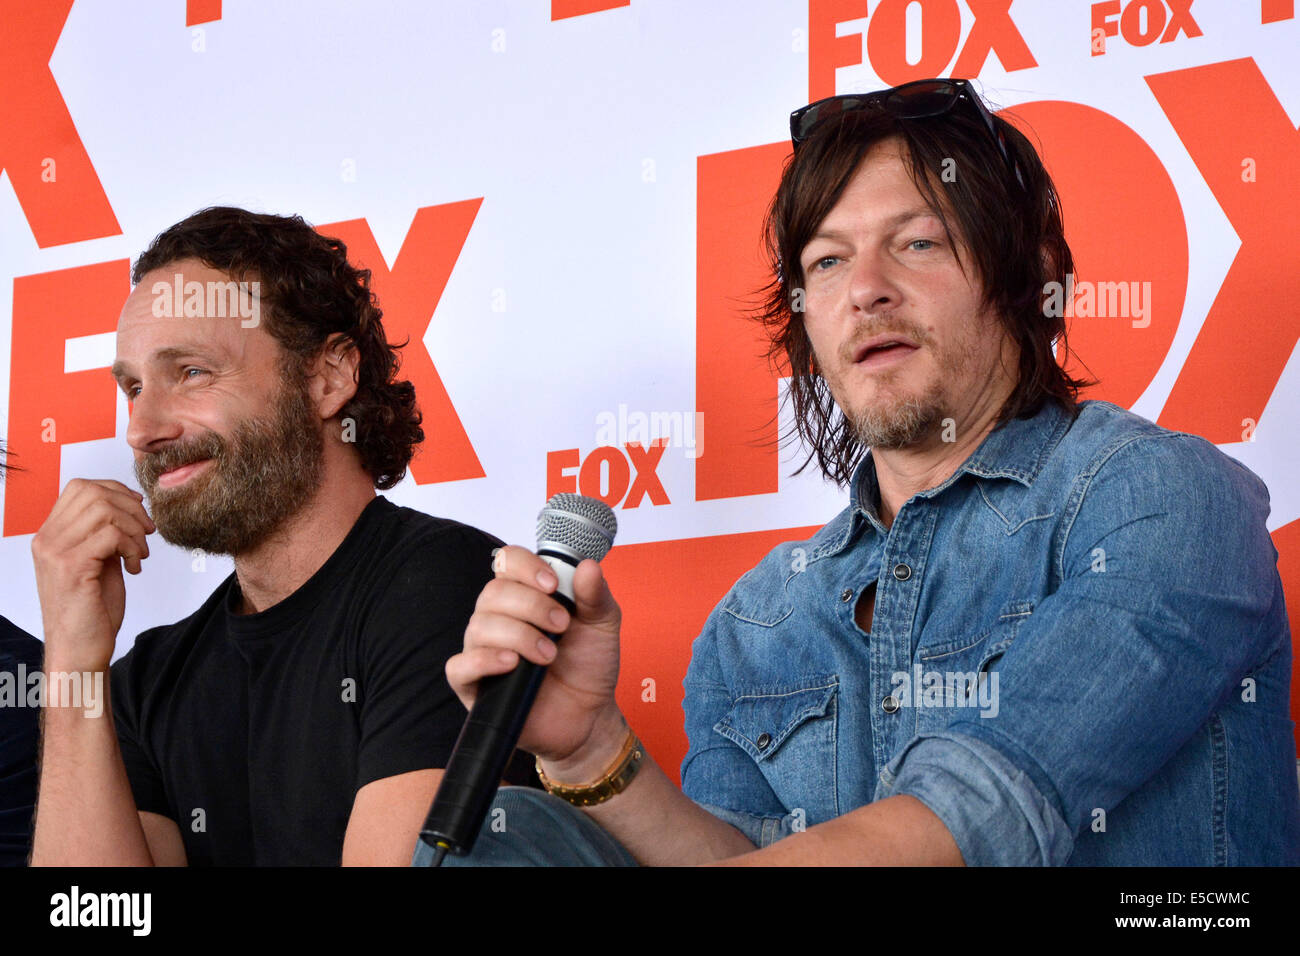 Andrew Lincoln and Norman Reedus attend the FOX Press Breakfast press conference of the series 'The Walking Dead' on July 25, 2014 at the roof lounge of the Andaz Hotel in San Diego during the San Diego Comic-Con International. Stock Photo